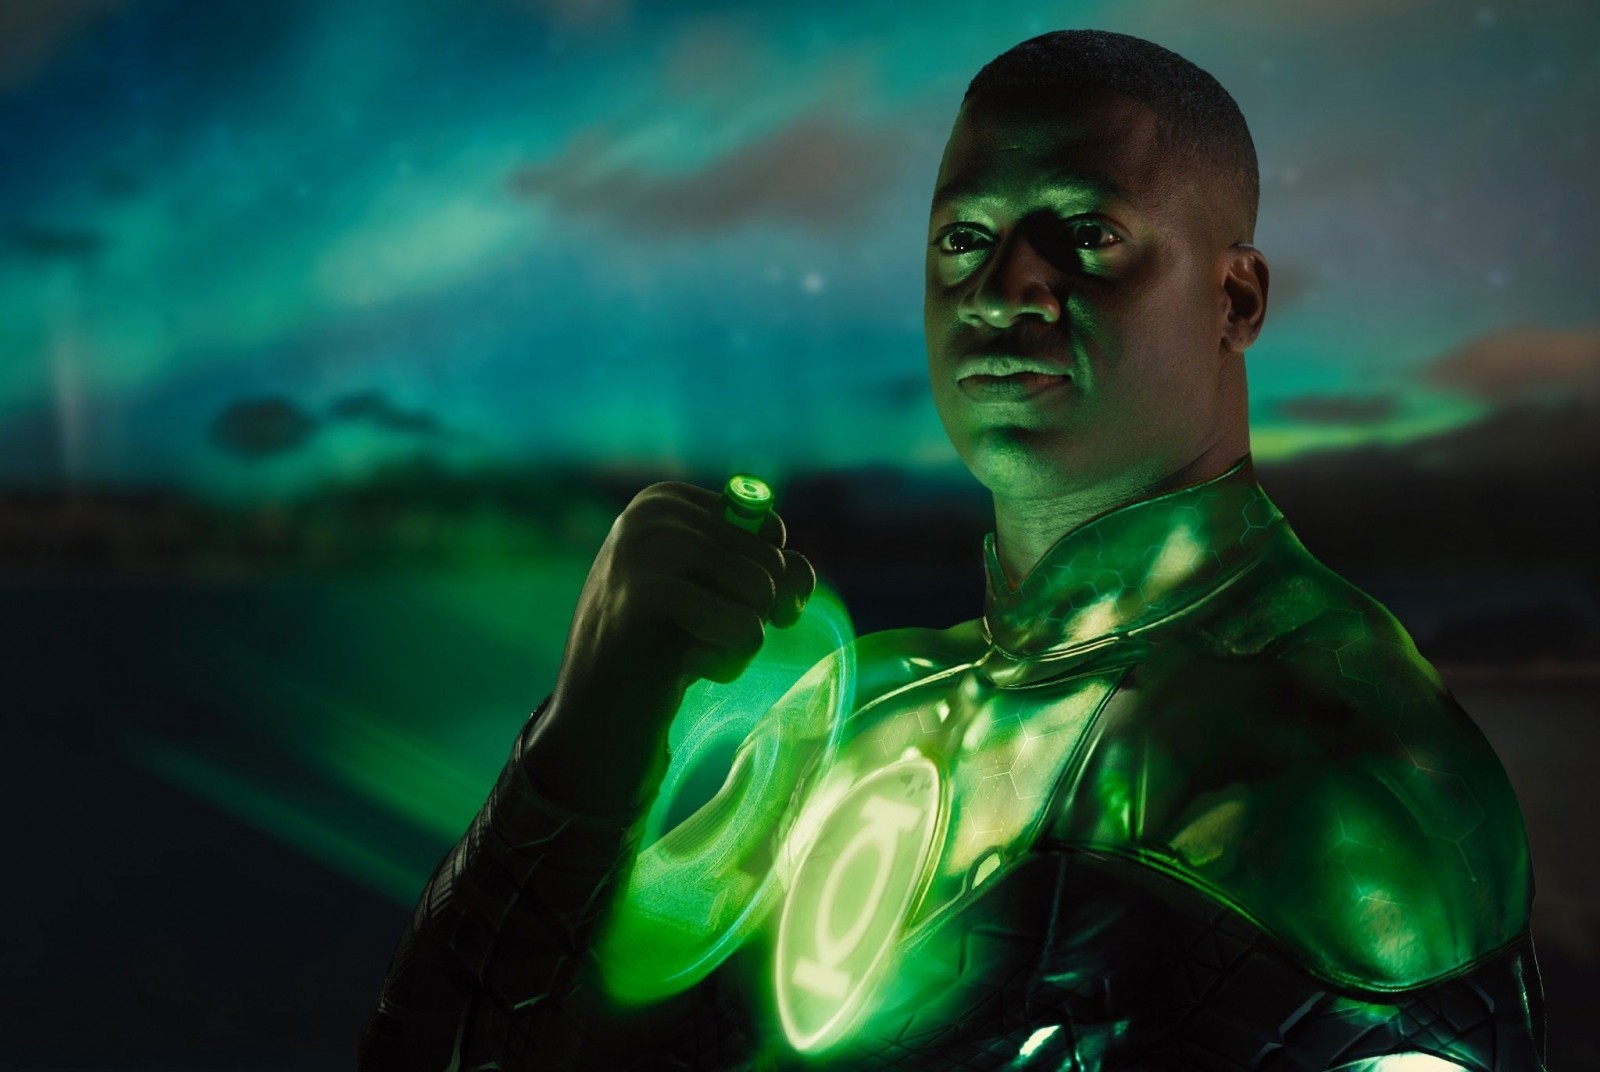 A deleted scene of Green Lantern in Zack Snyder's Justice League